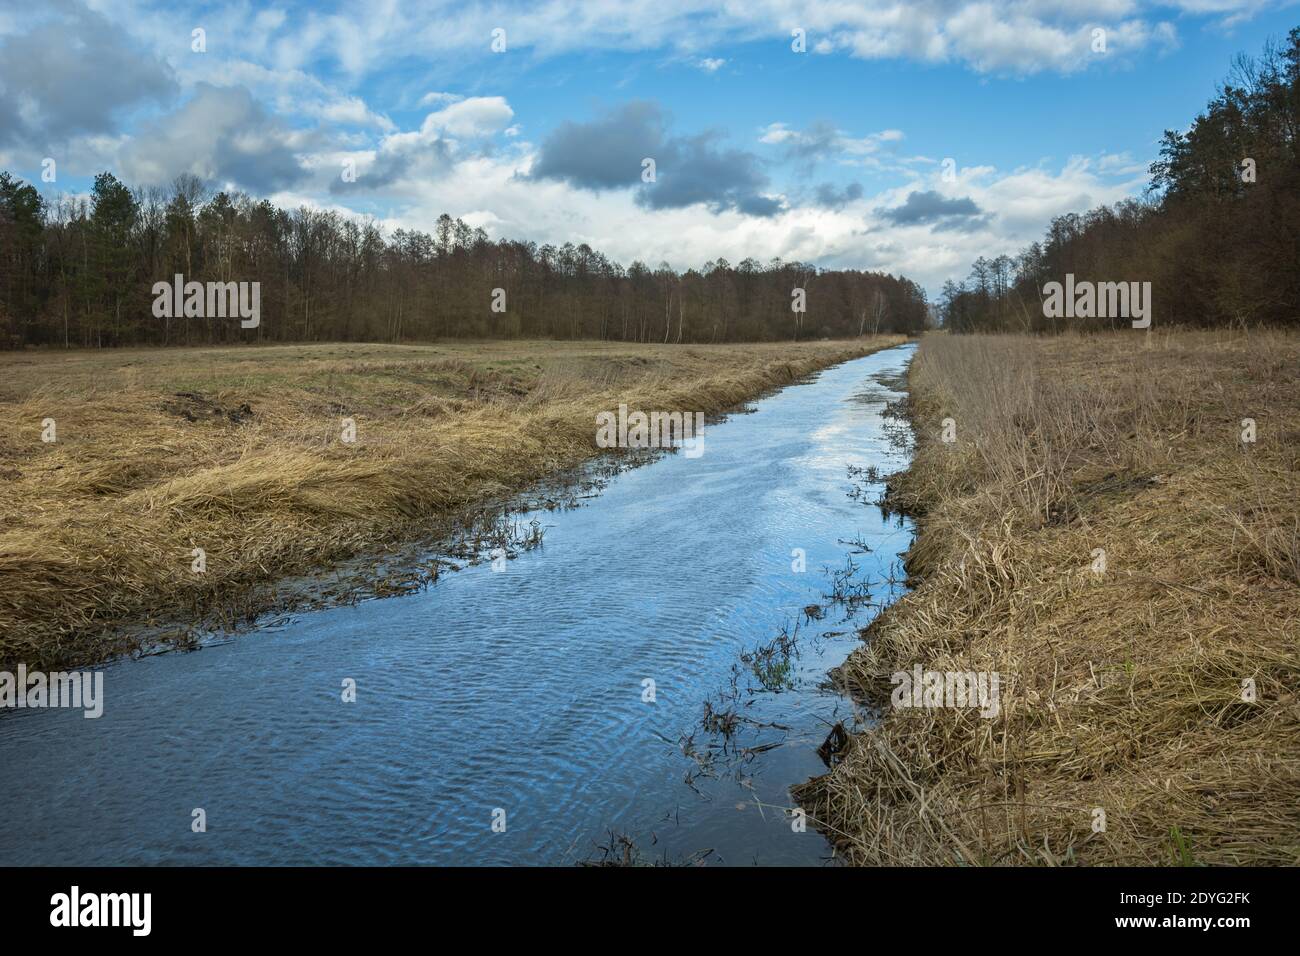 A calm river and dry grasses on the banks, forest and clouds Stock Photo